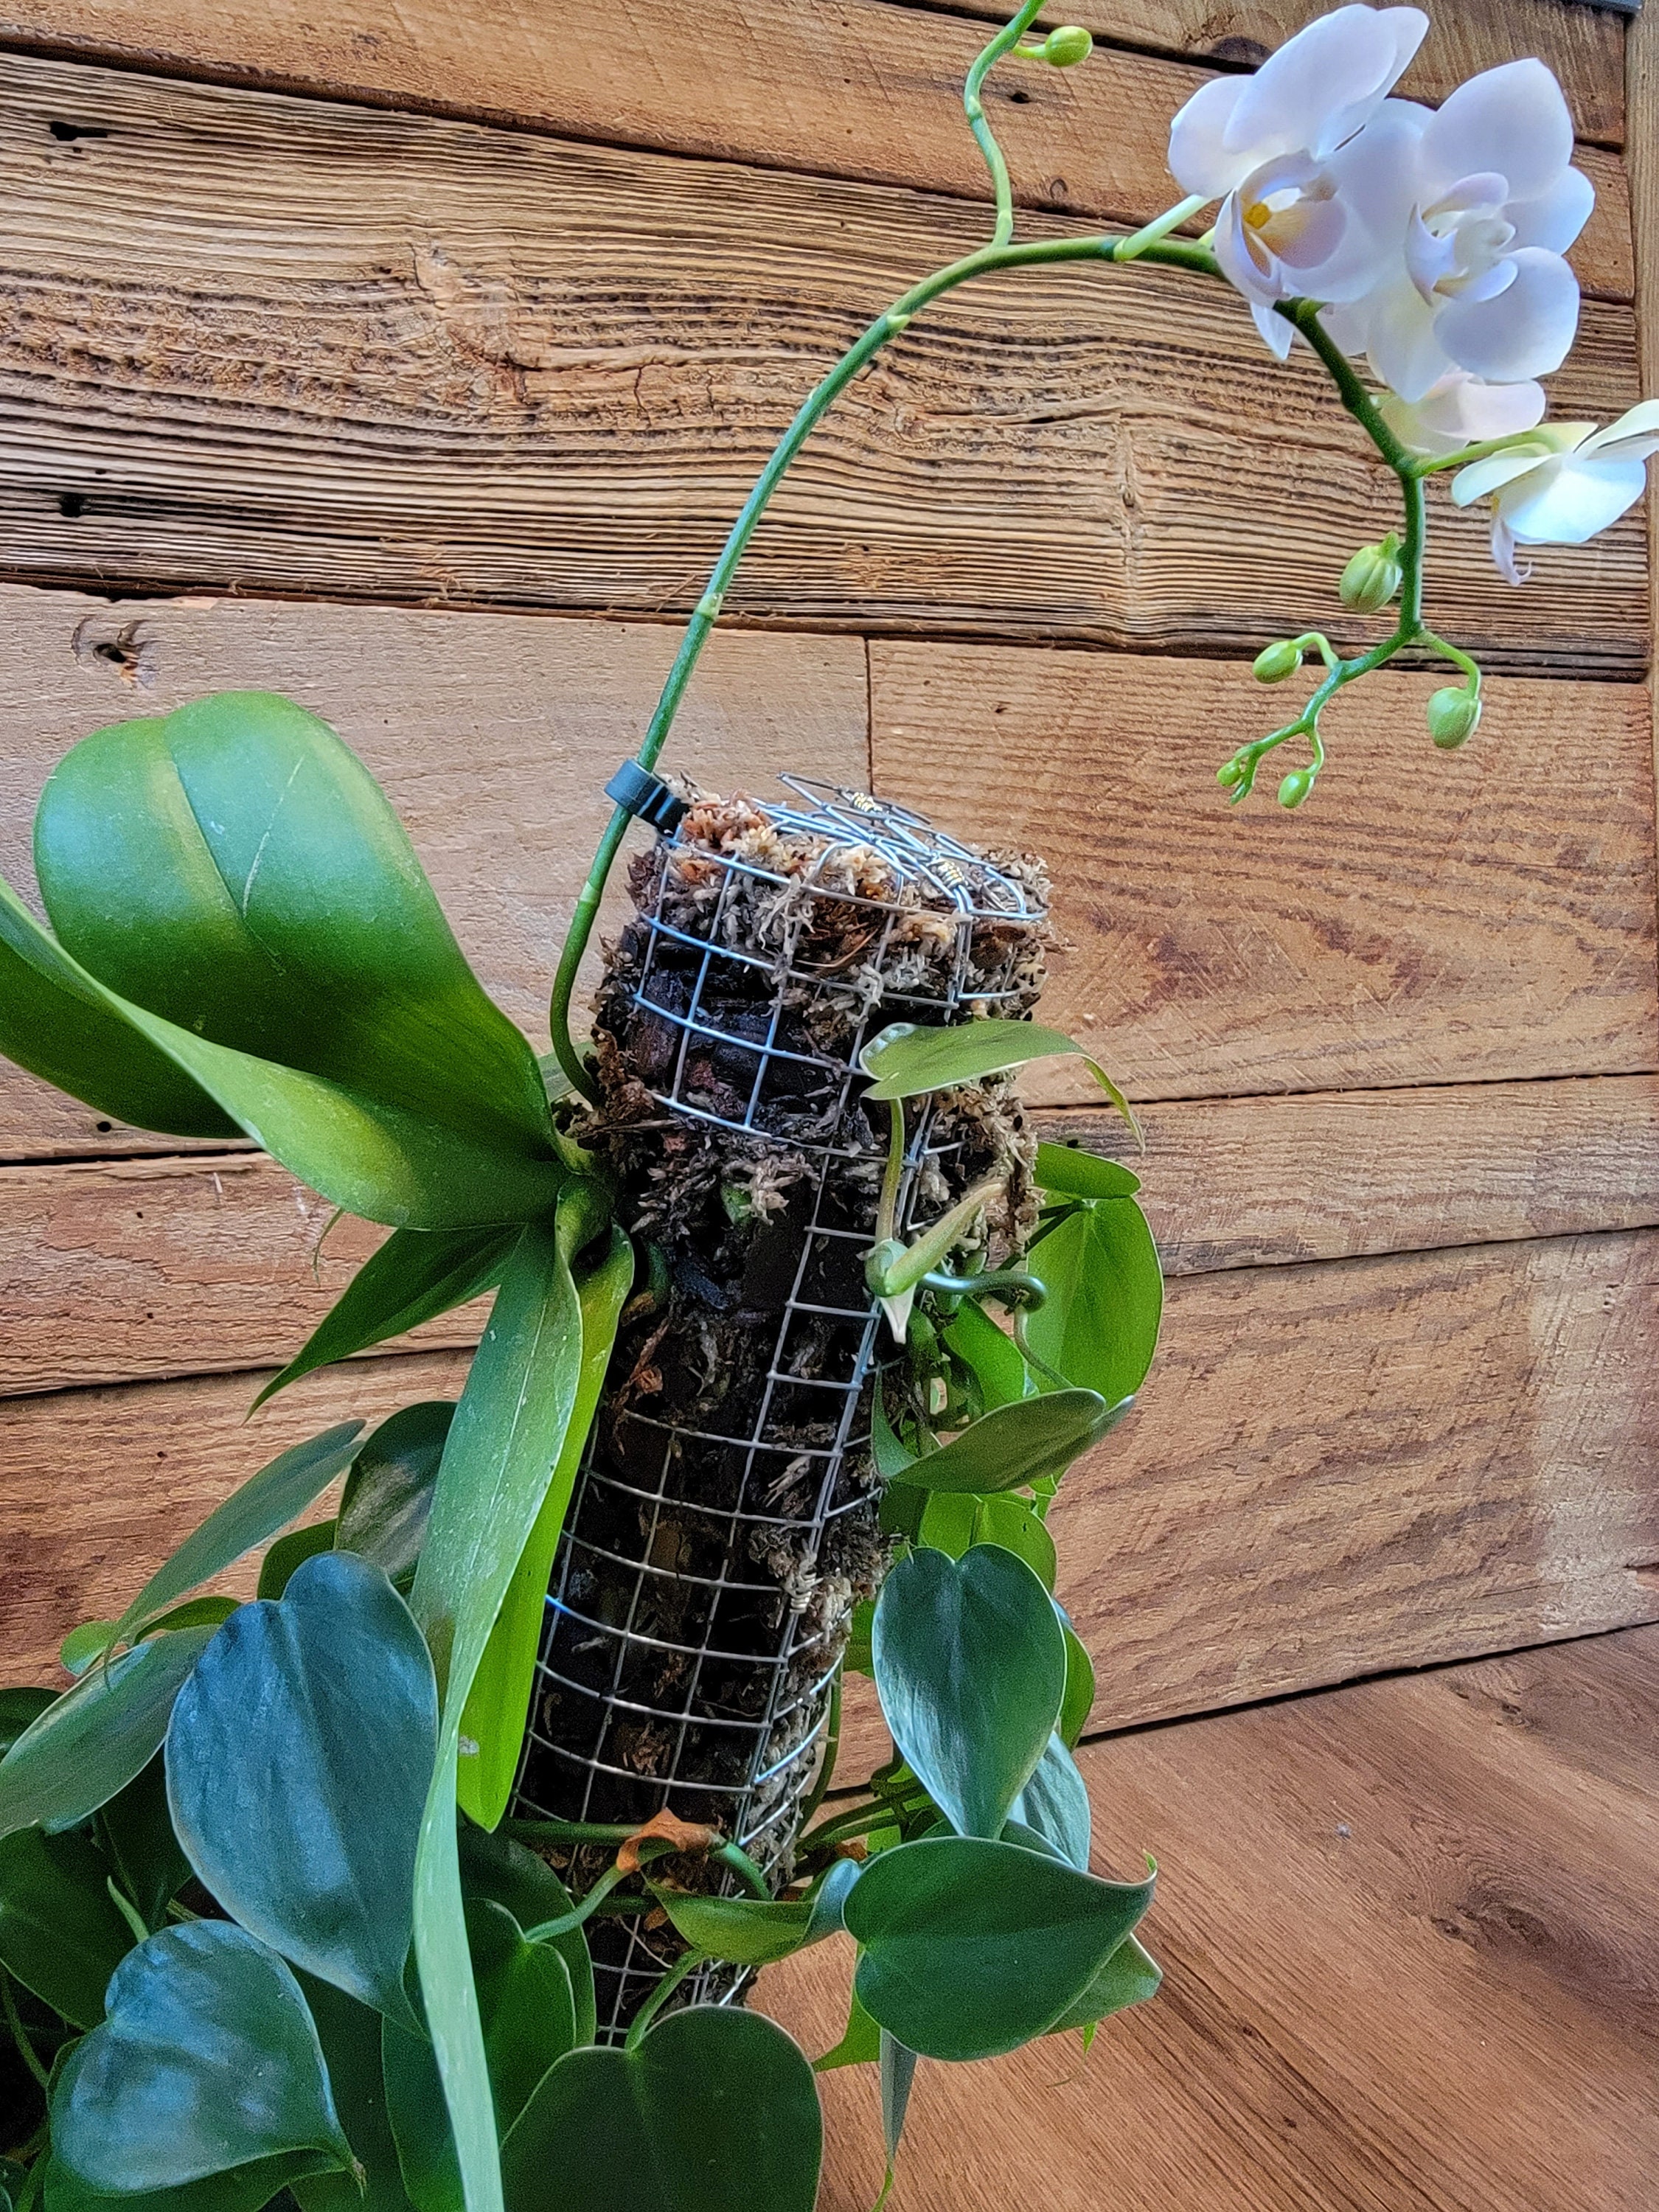 Just an orchid casually living atop this moss pole : r/houseplants